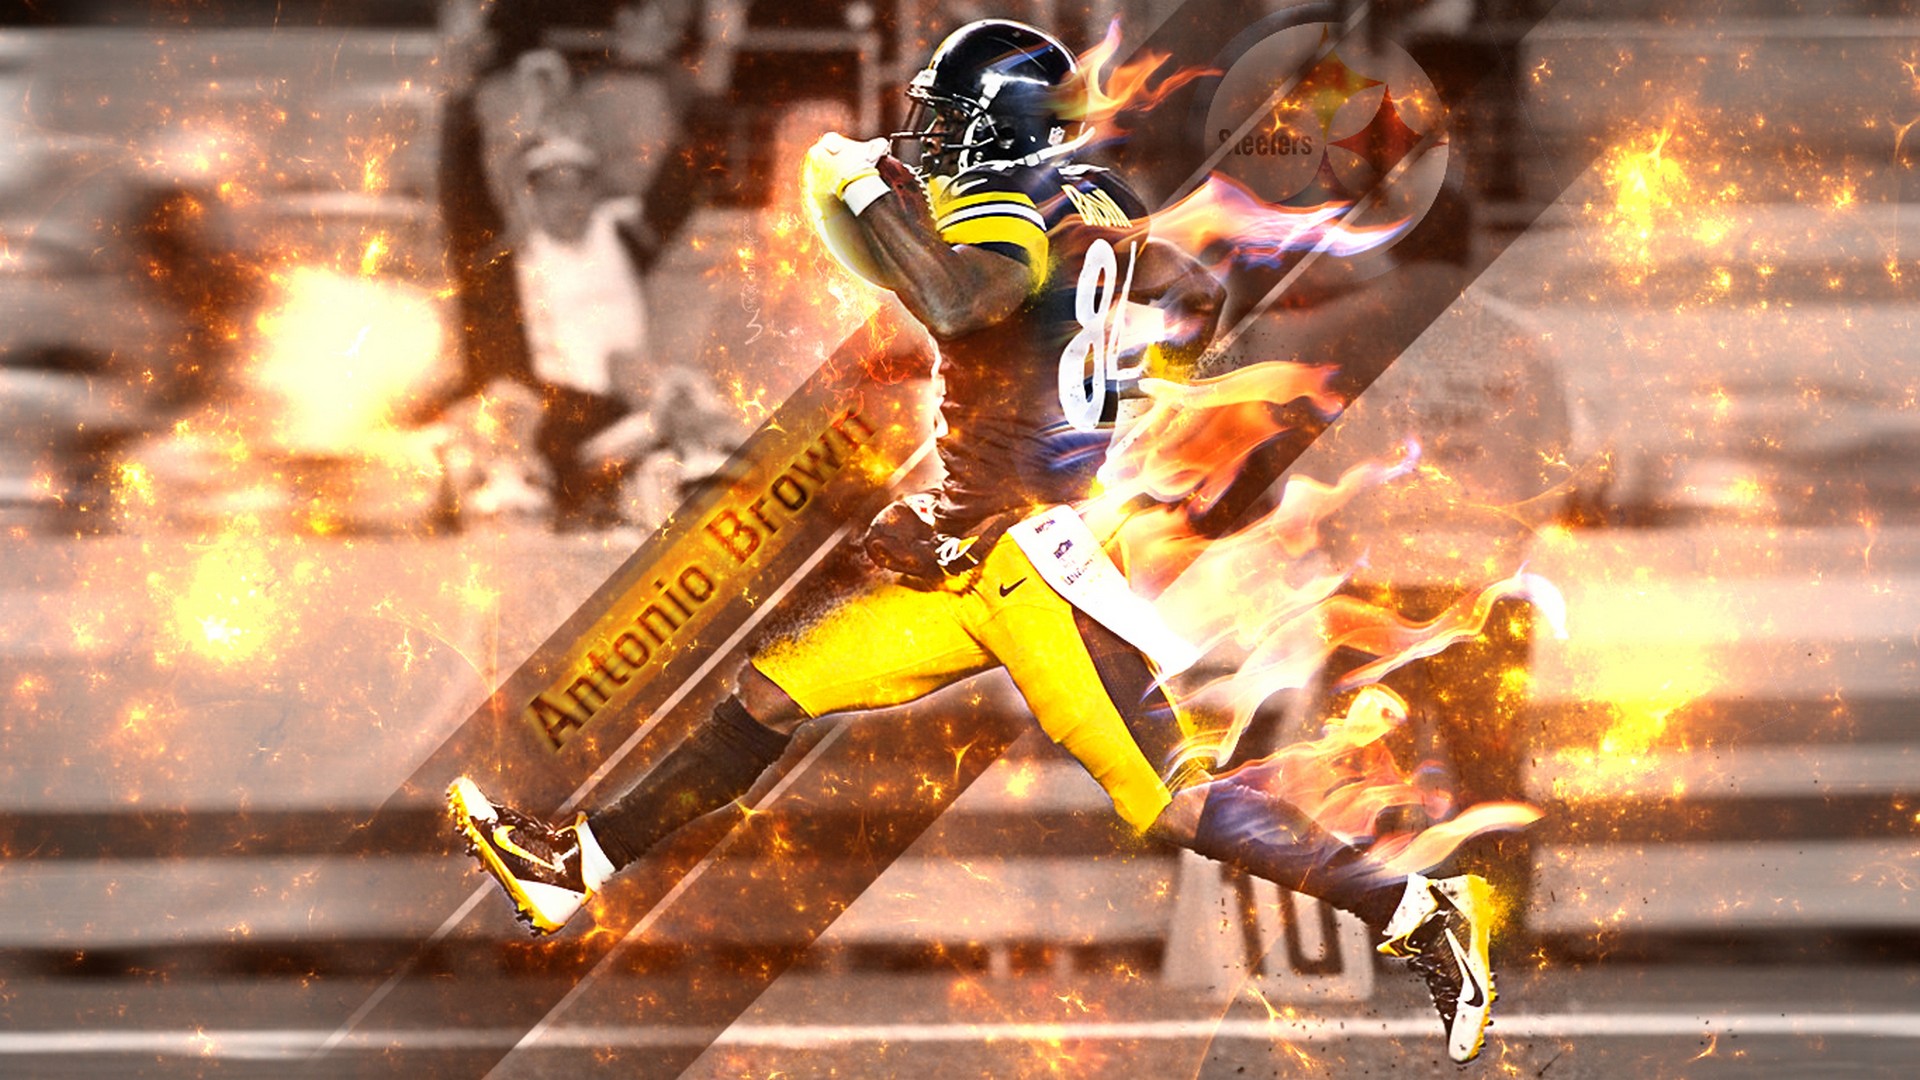 HD Pitt Steelers Backgrounds with resolution 1920x1080 pixel. You can make this wallpaper for your Mac or Windows Desktop Background, iPhone, Android or Tablet and another Smartphone device